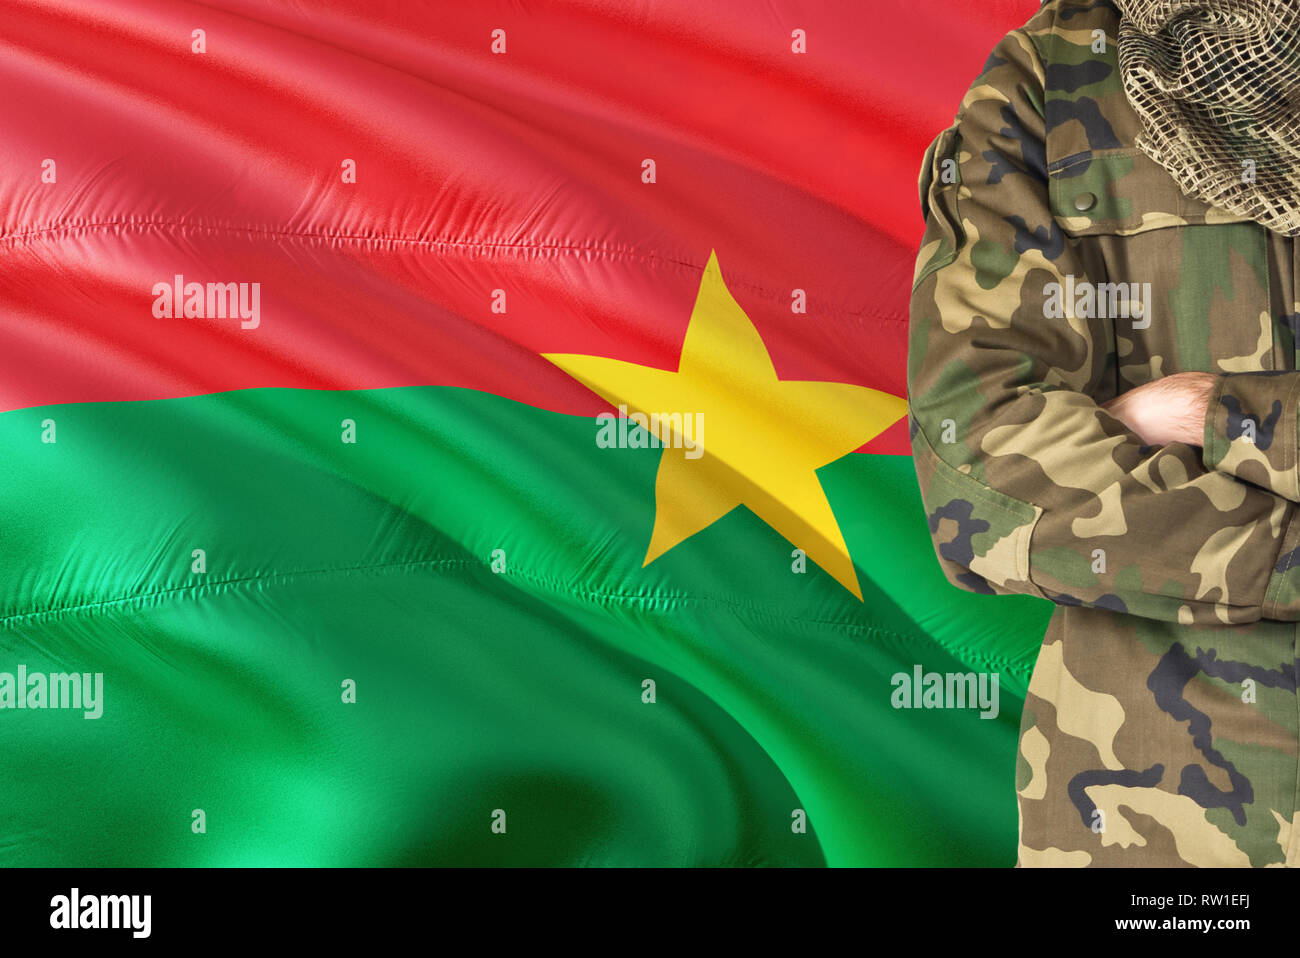 Crossed arms soldier with national waving flag on background - Burkina Faso Military theme. Stock Photo